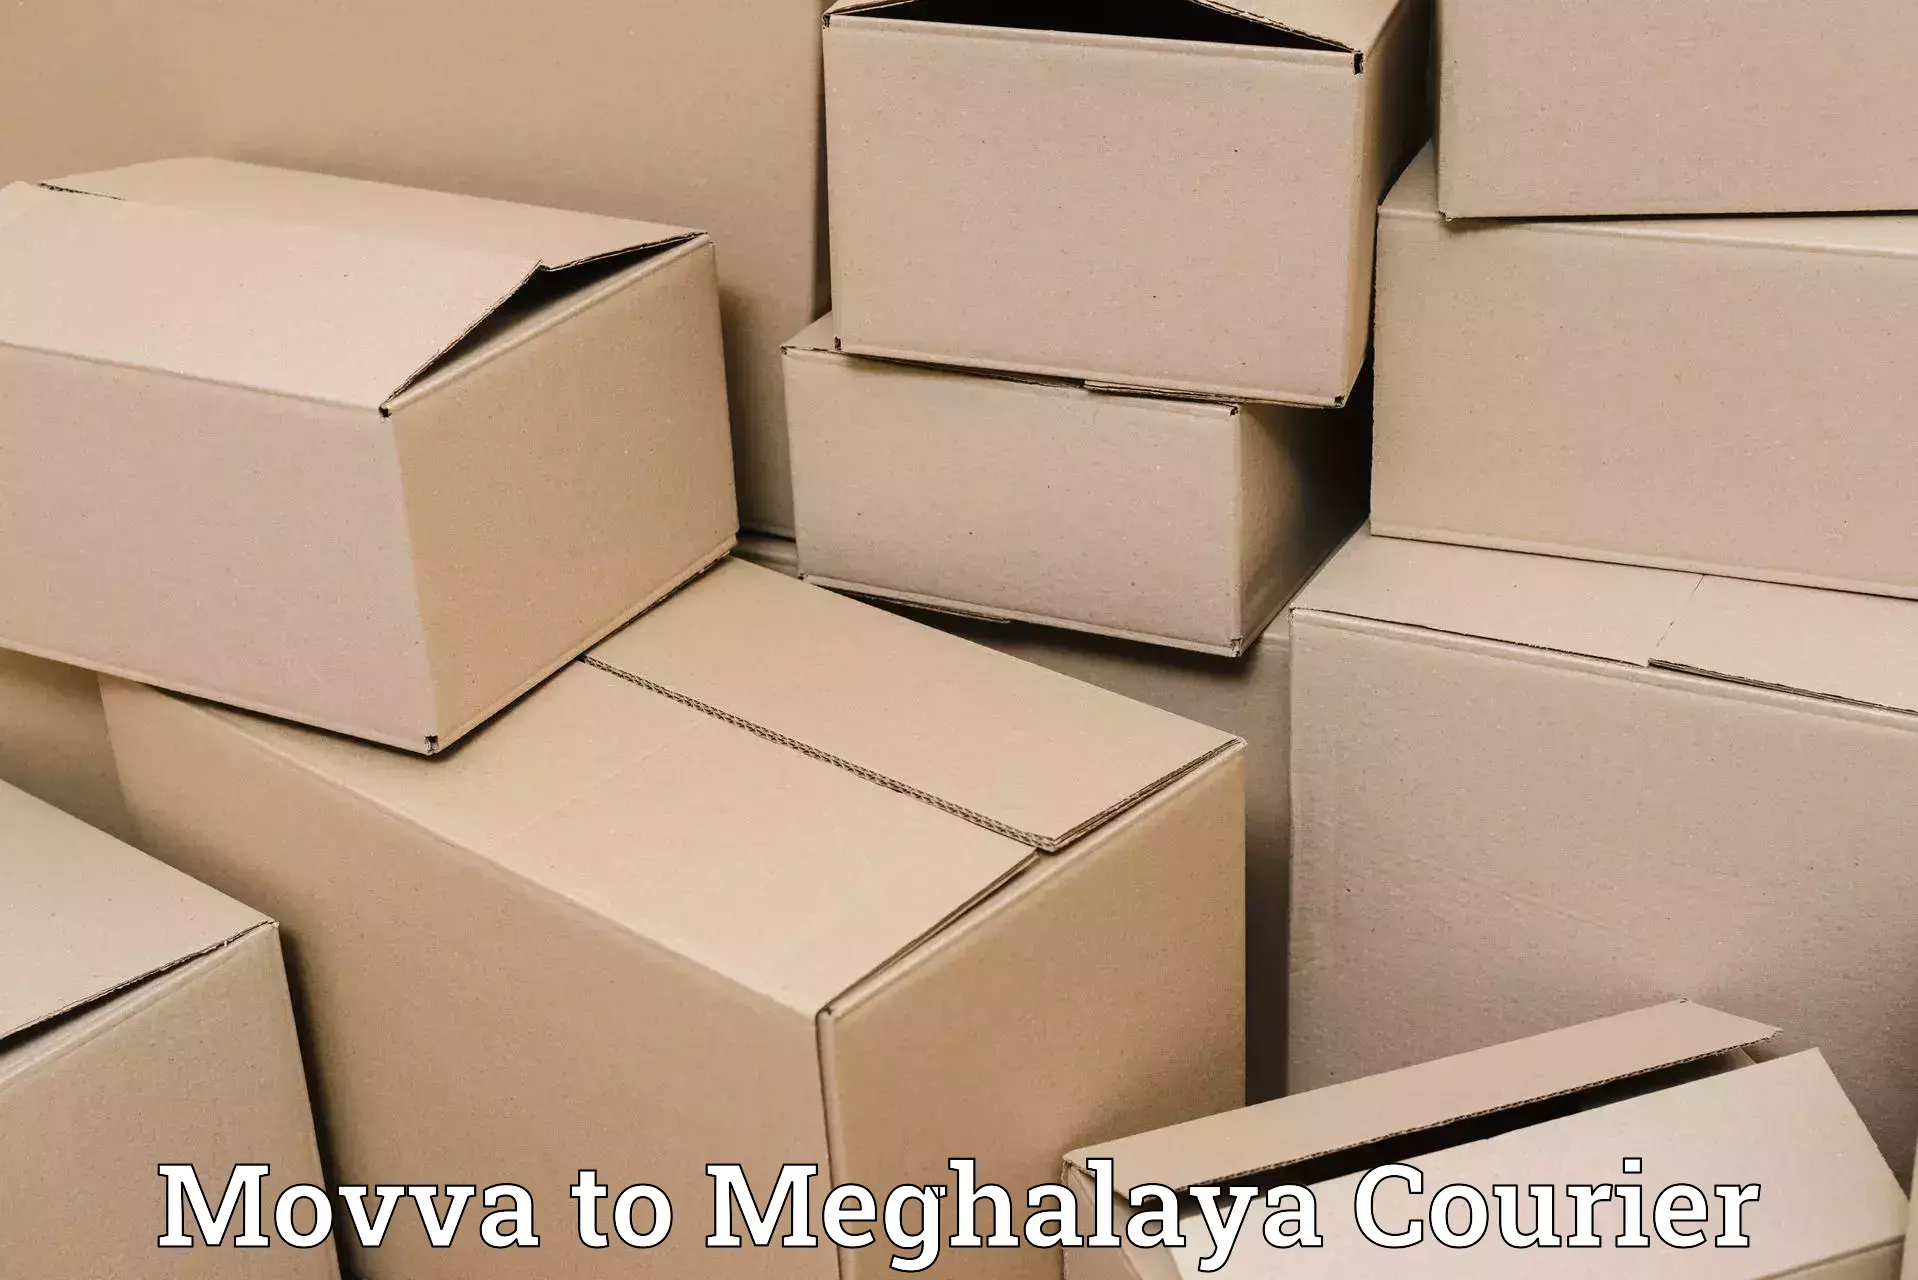 Local delivery service Movva to Meghalaya